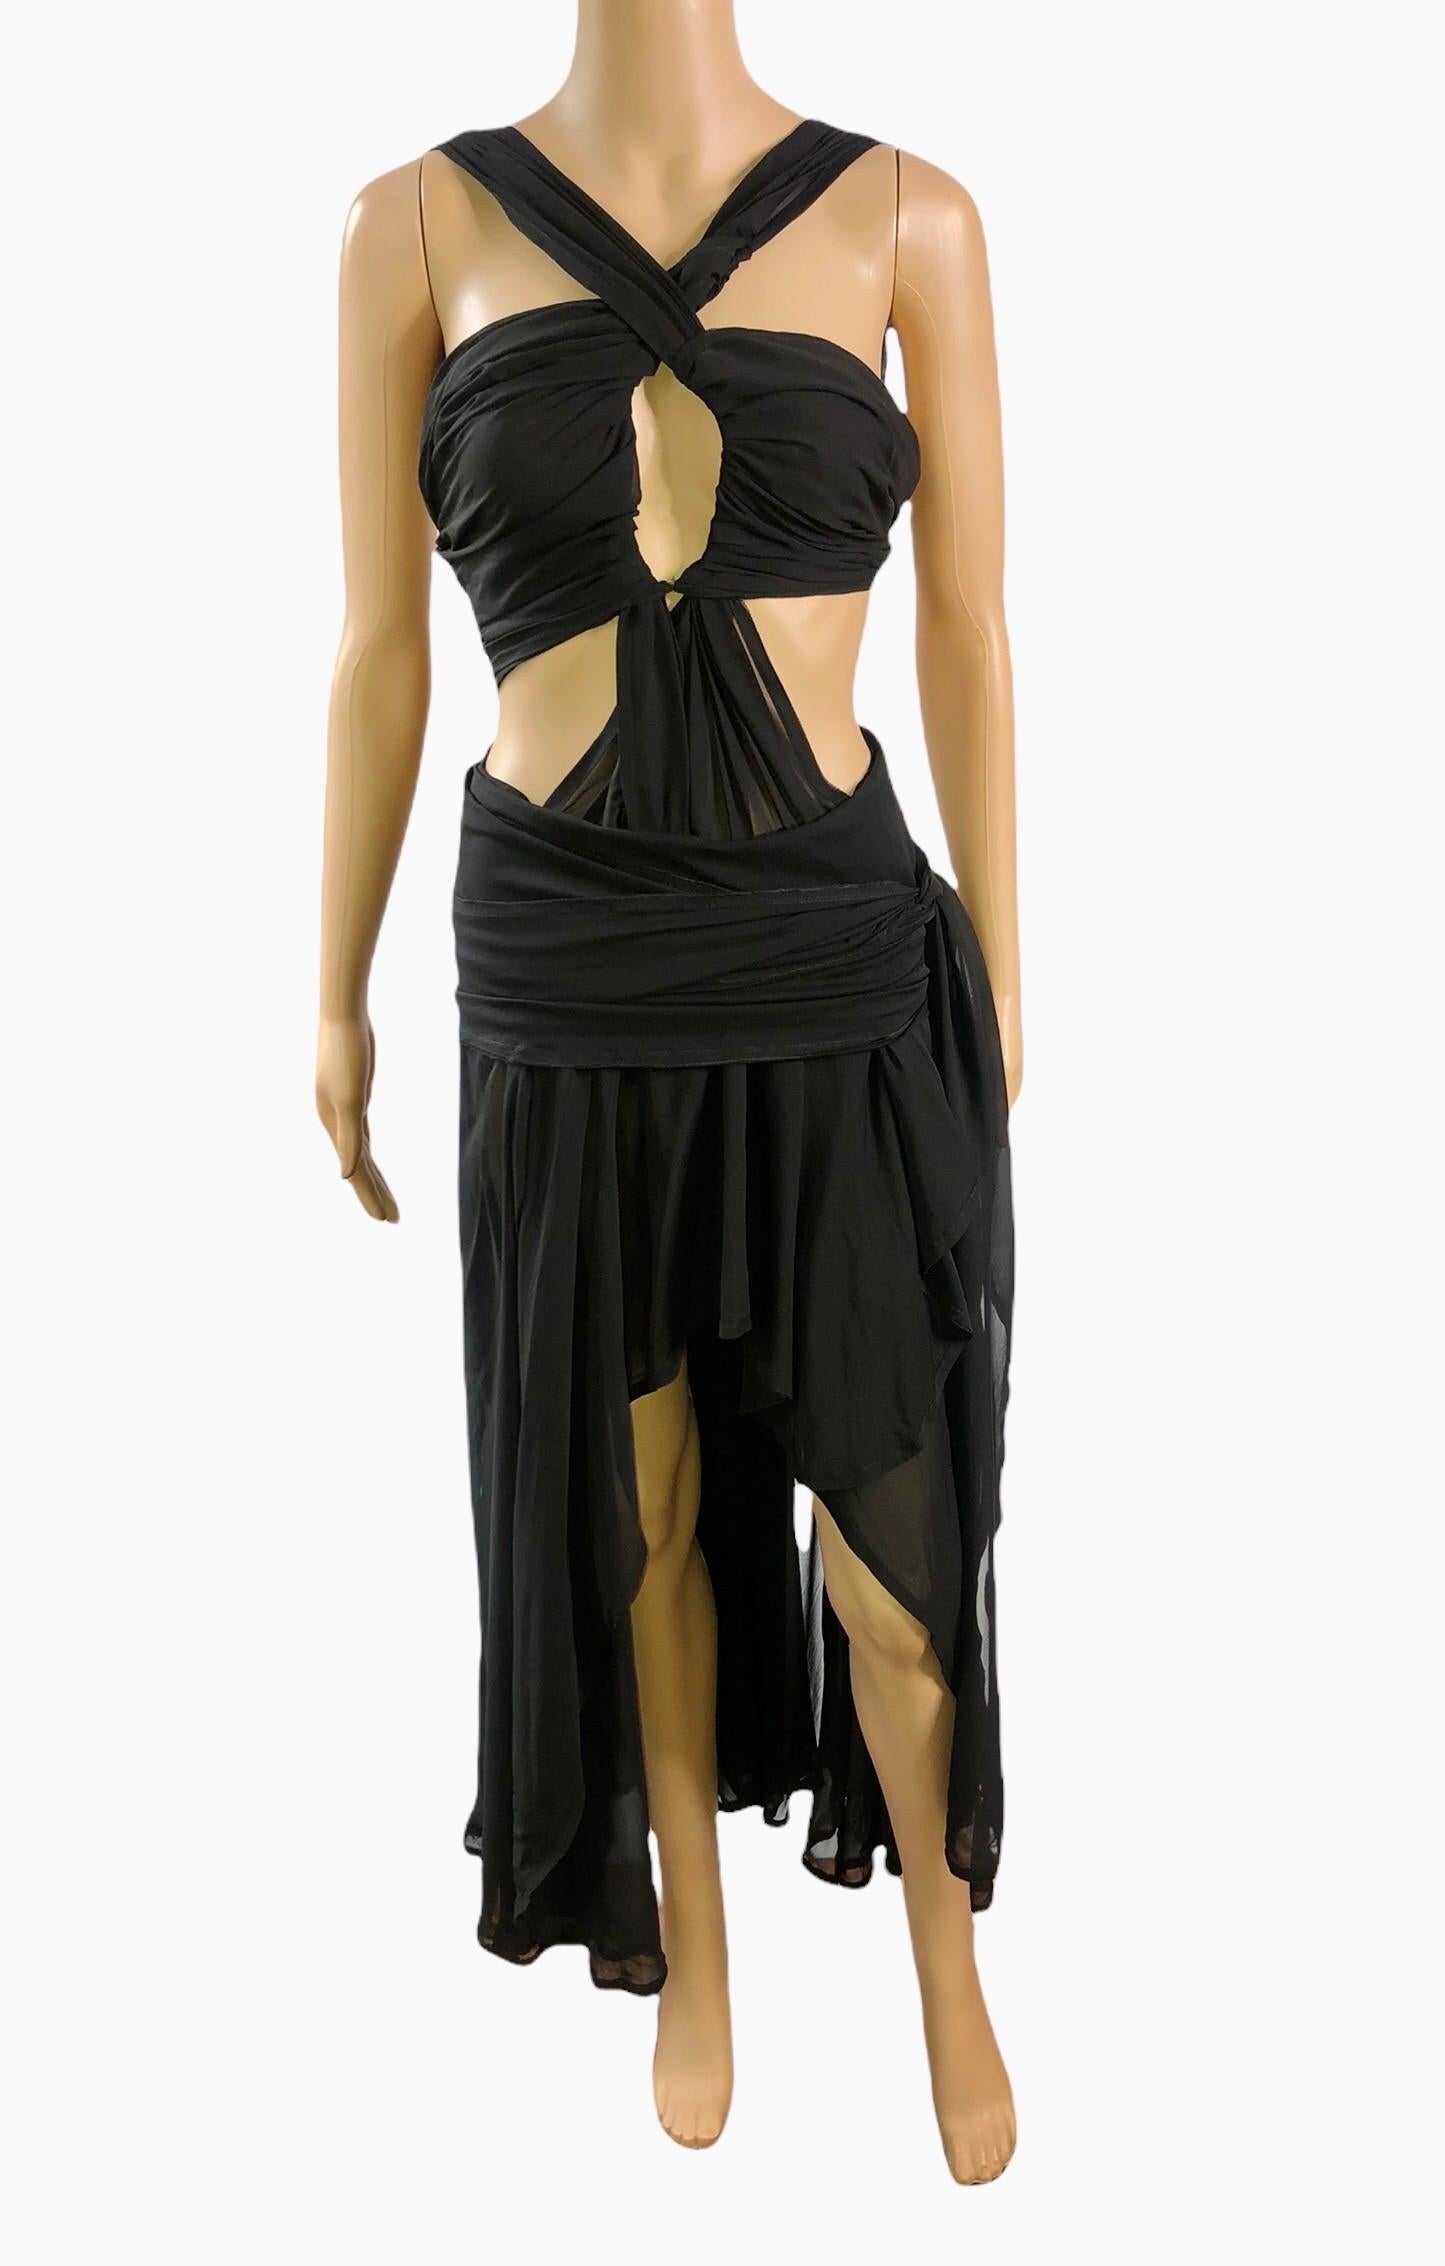 Tom Ford for Yves Saint Laurent S/S 2002 Runway Sheer Cutout Black Dress Gown For Sale 4